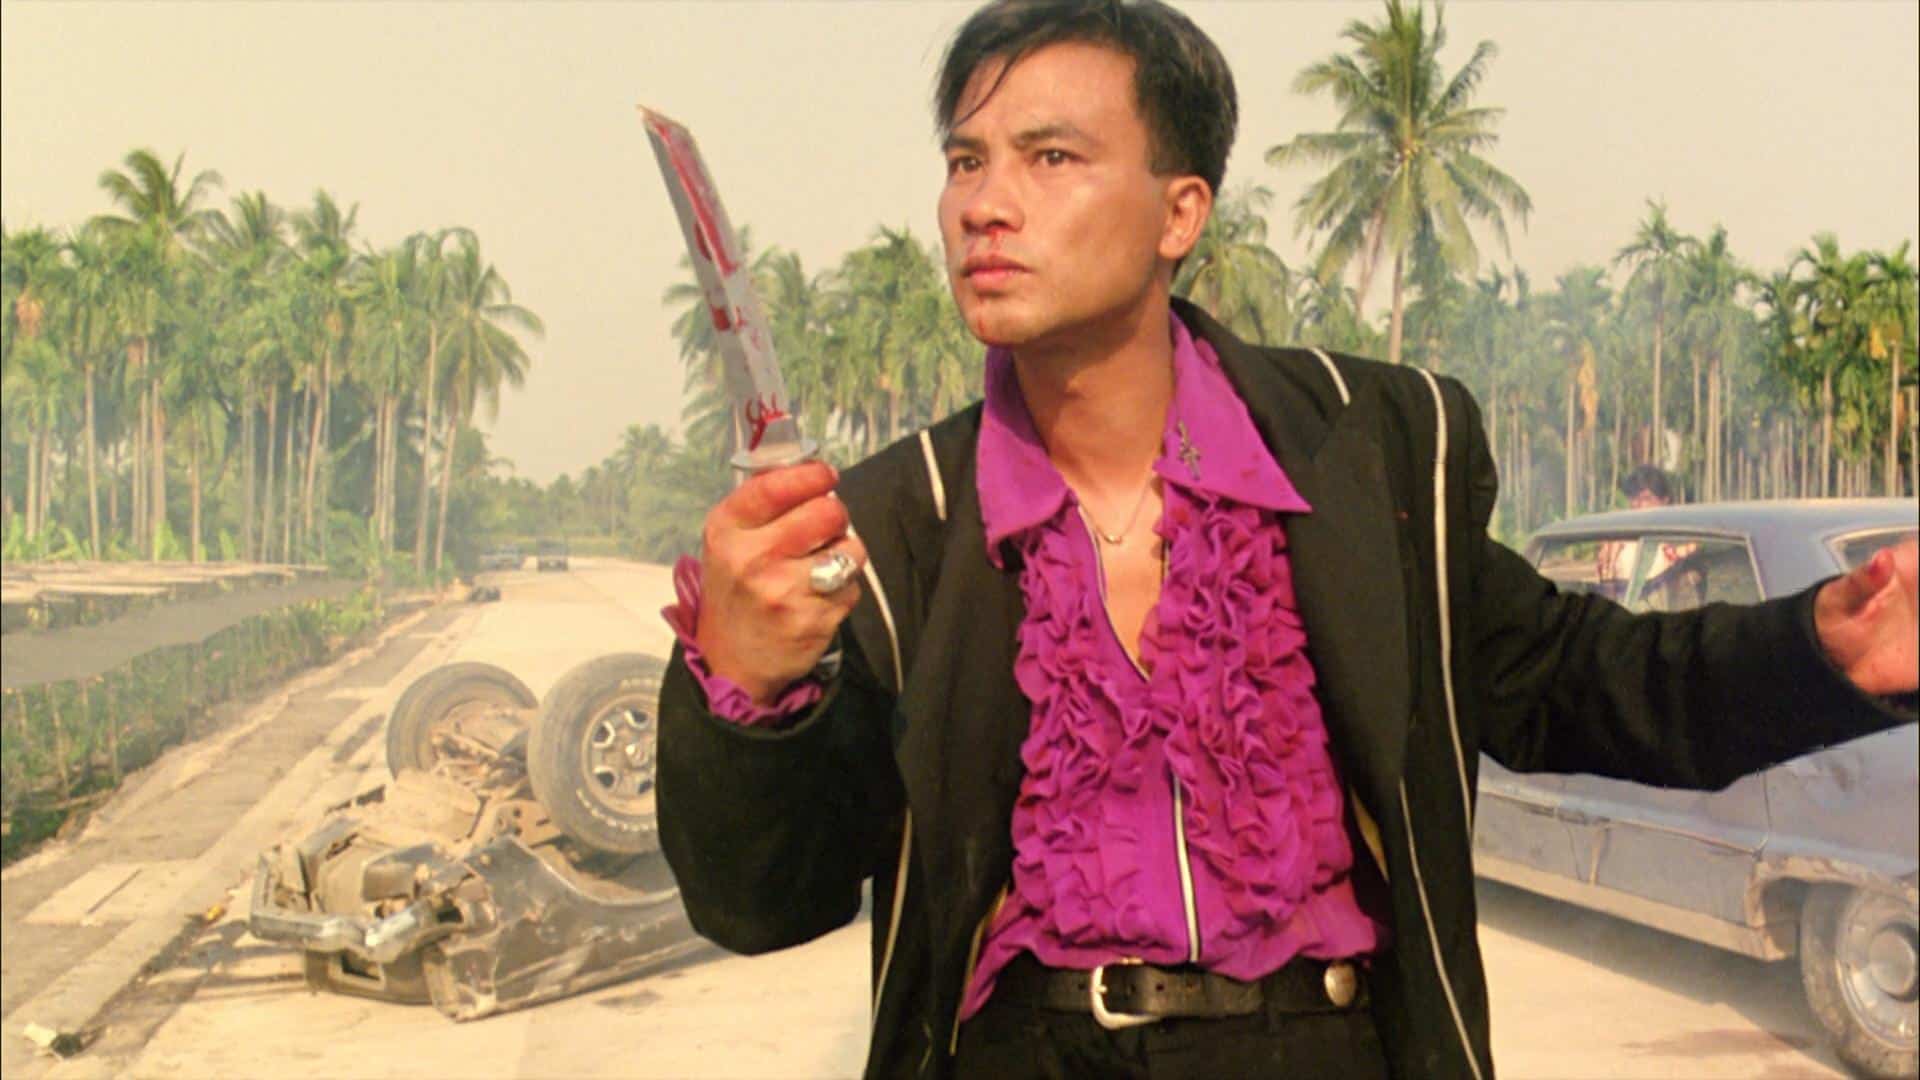 Judge (Full Contact, played by Simon Yam)